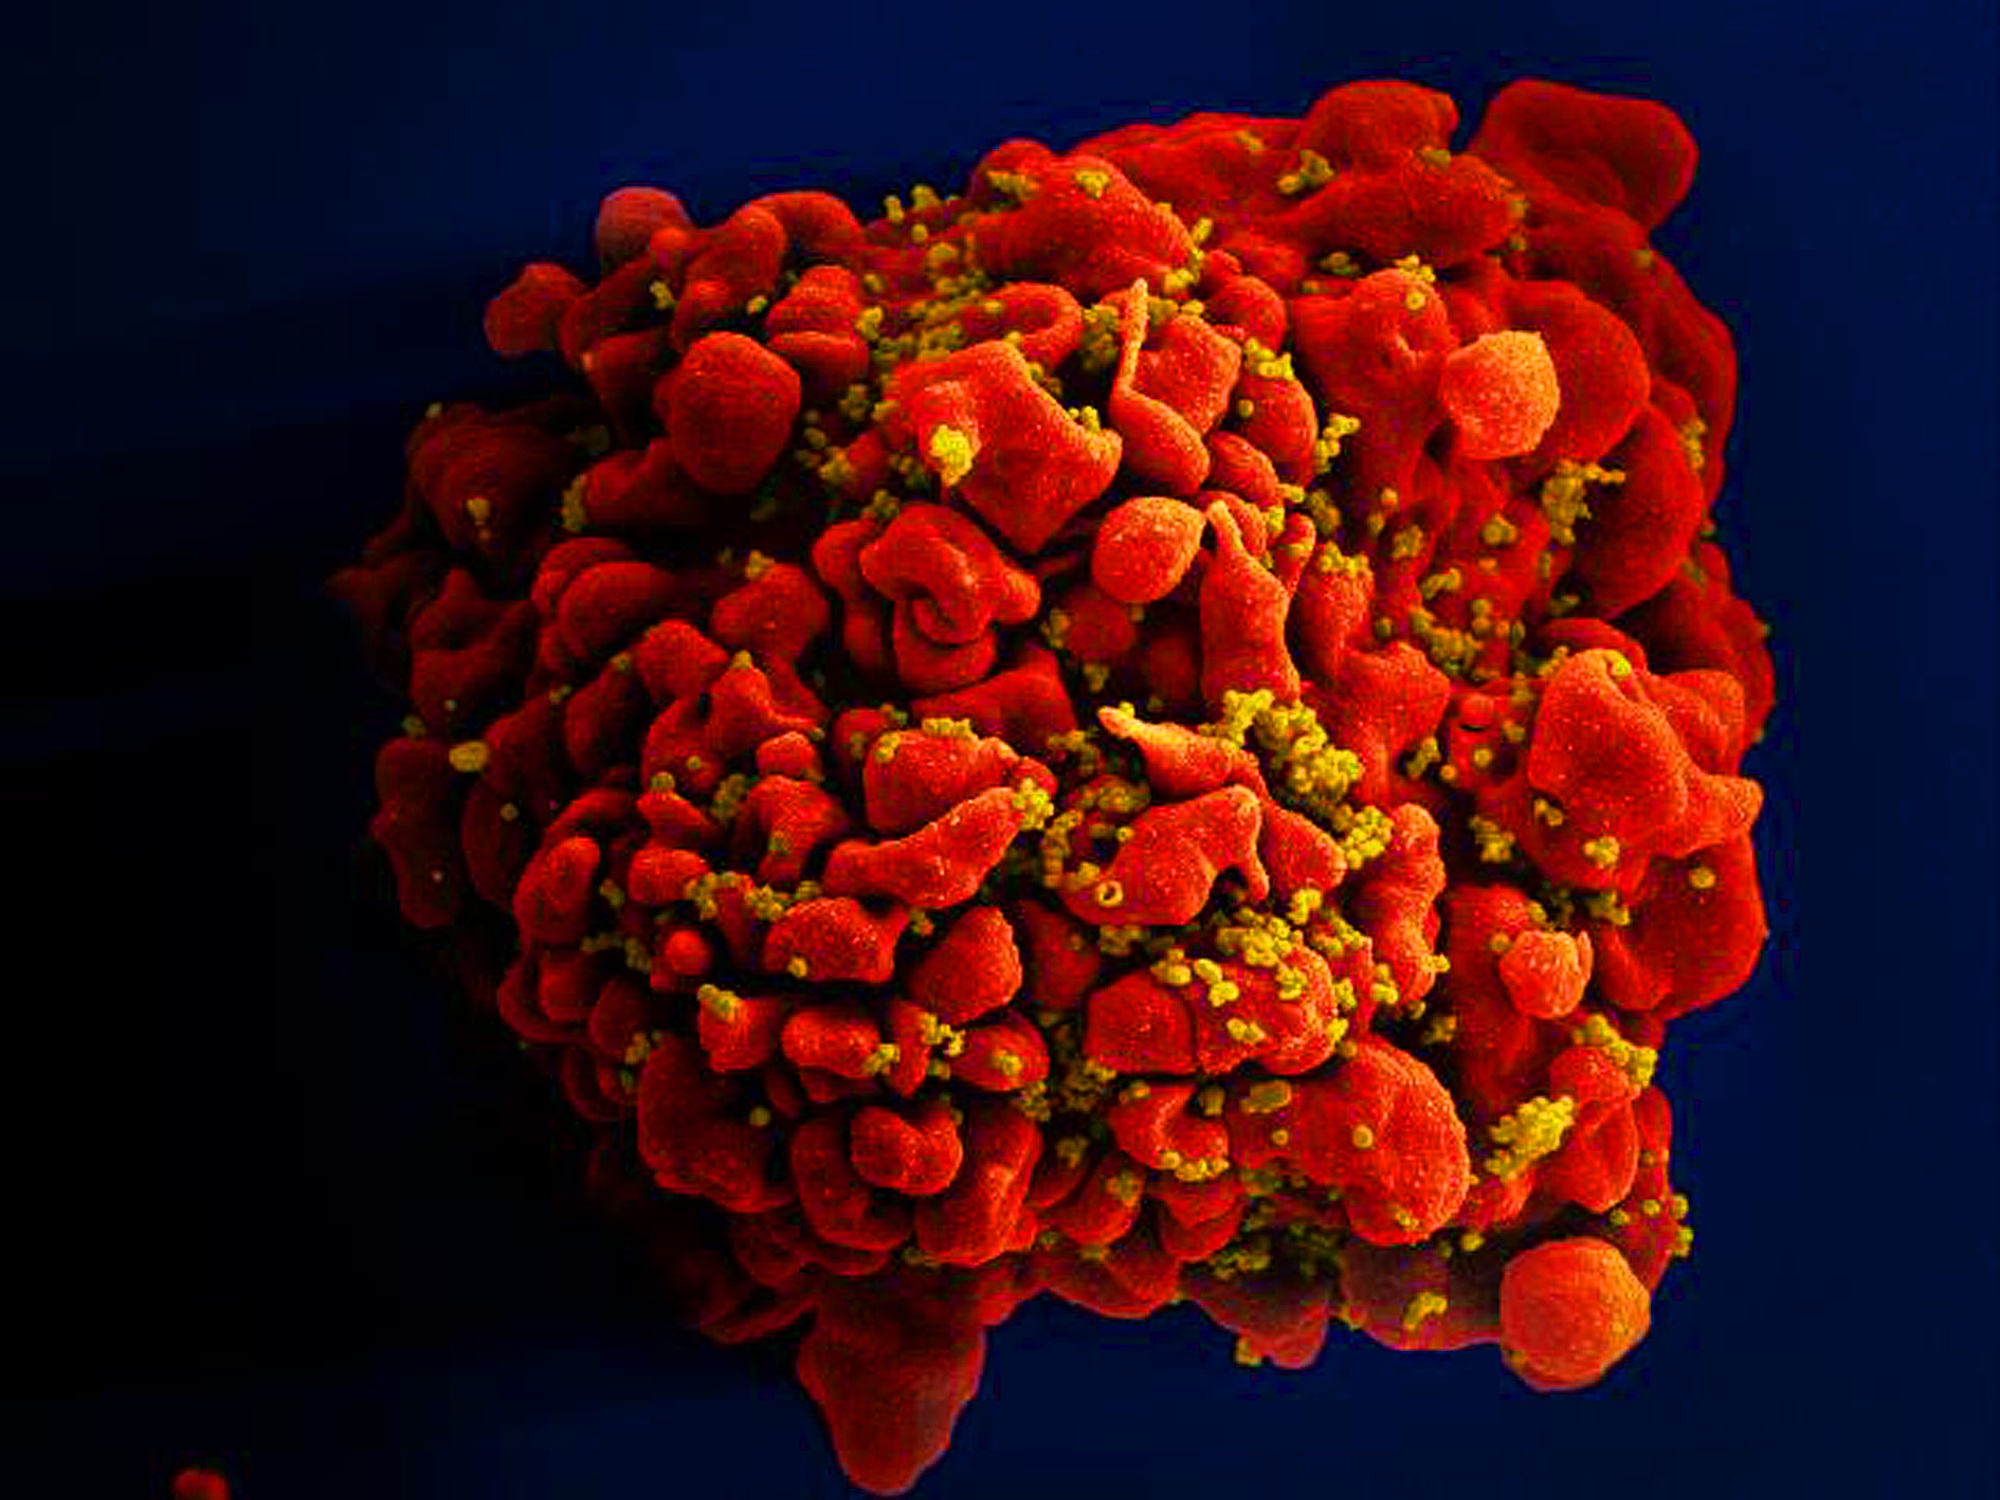 H9-T cell infected by HIV